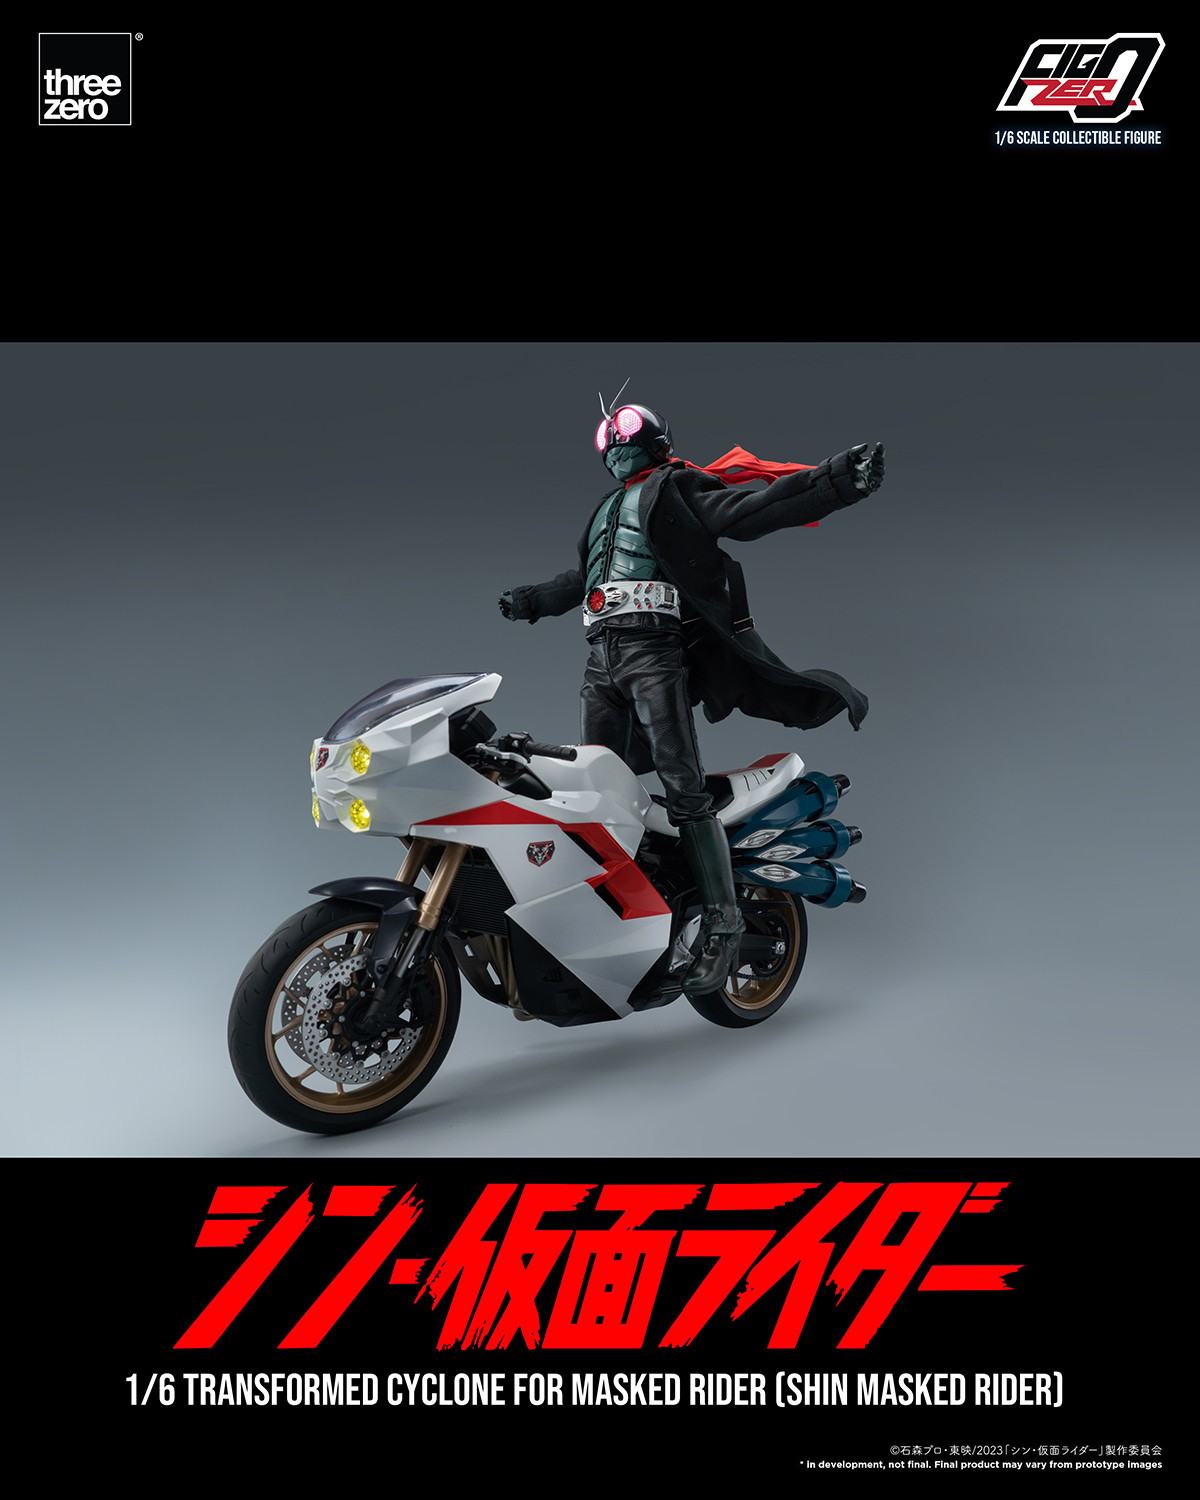 Transformed Cyclone for Masked Rider (Shin Masked Rider) (Prototype Shown) View 24